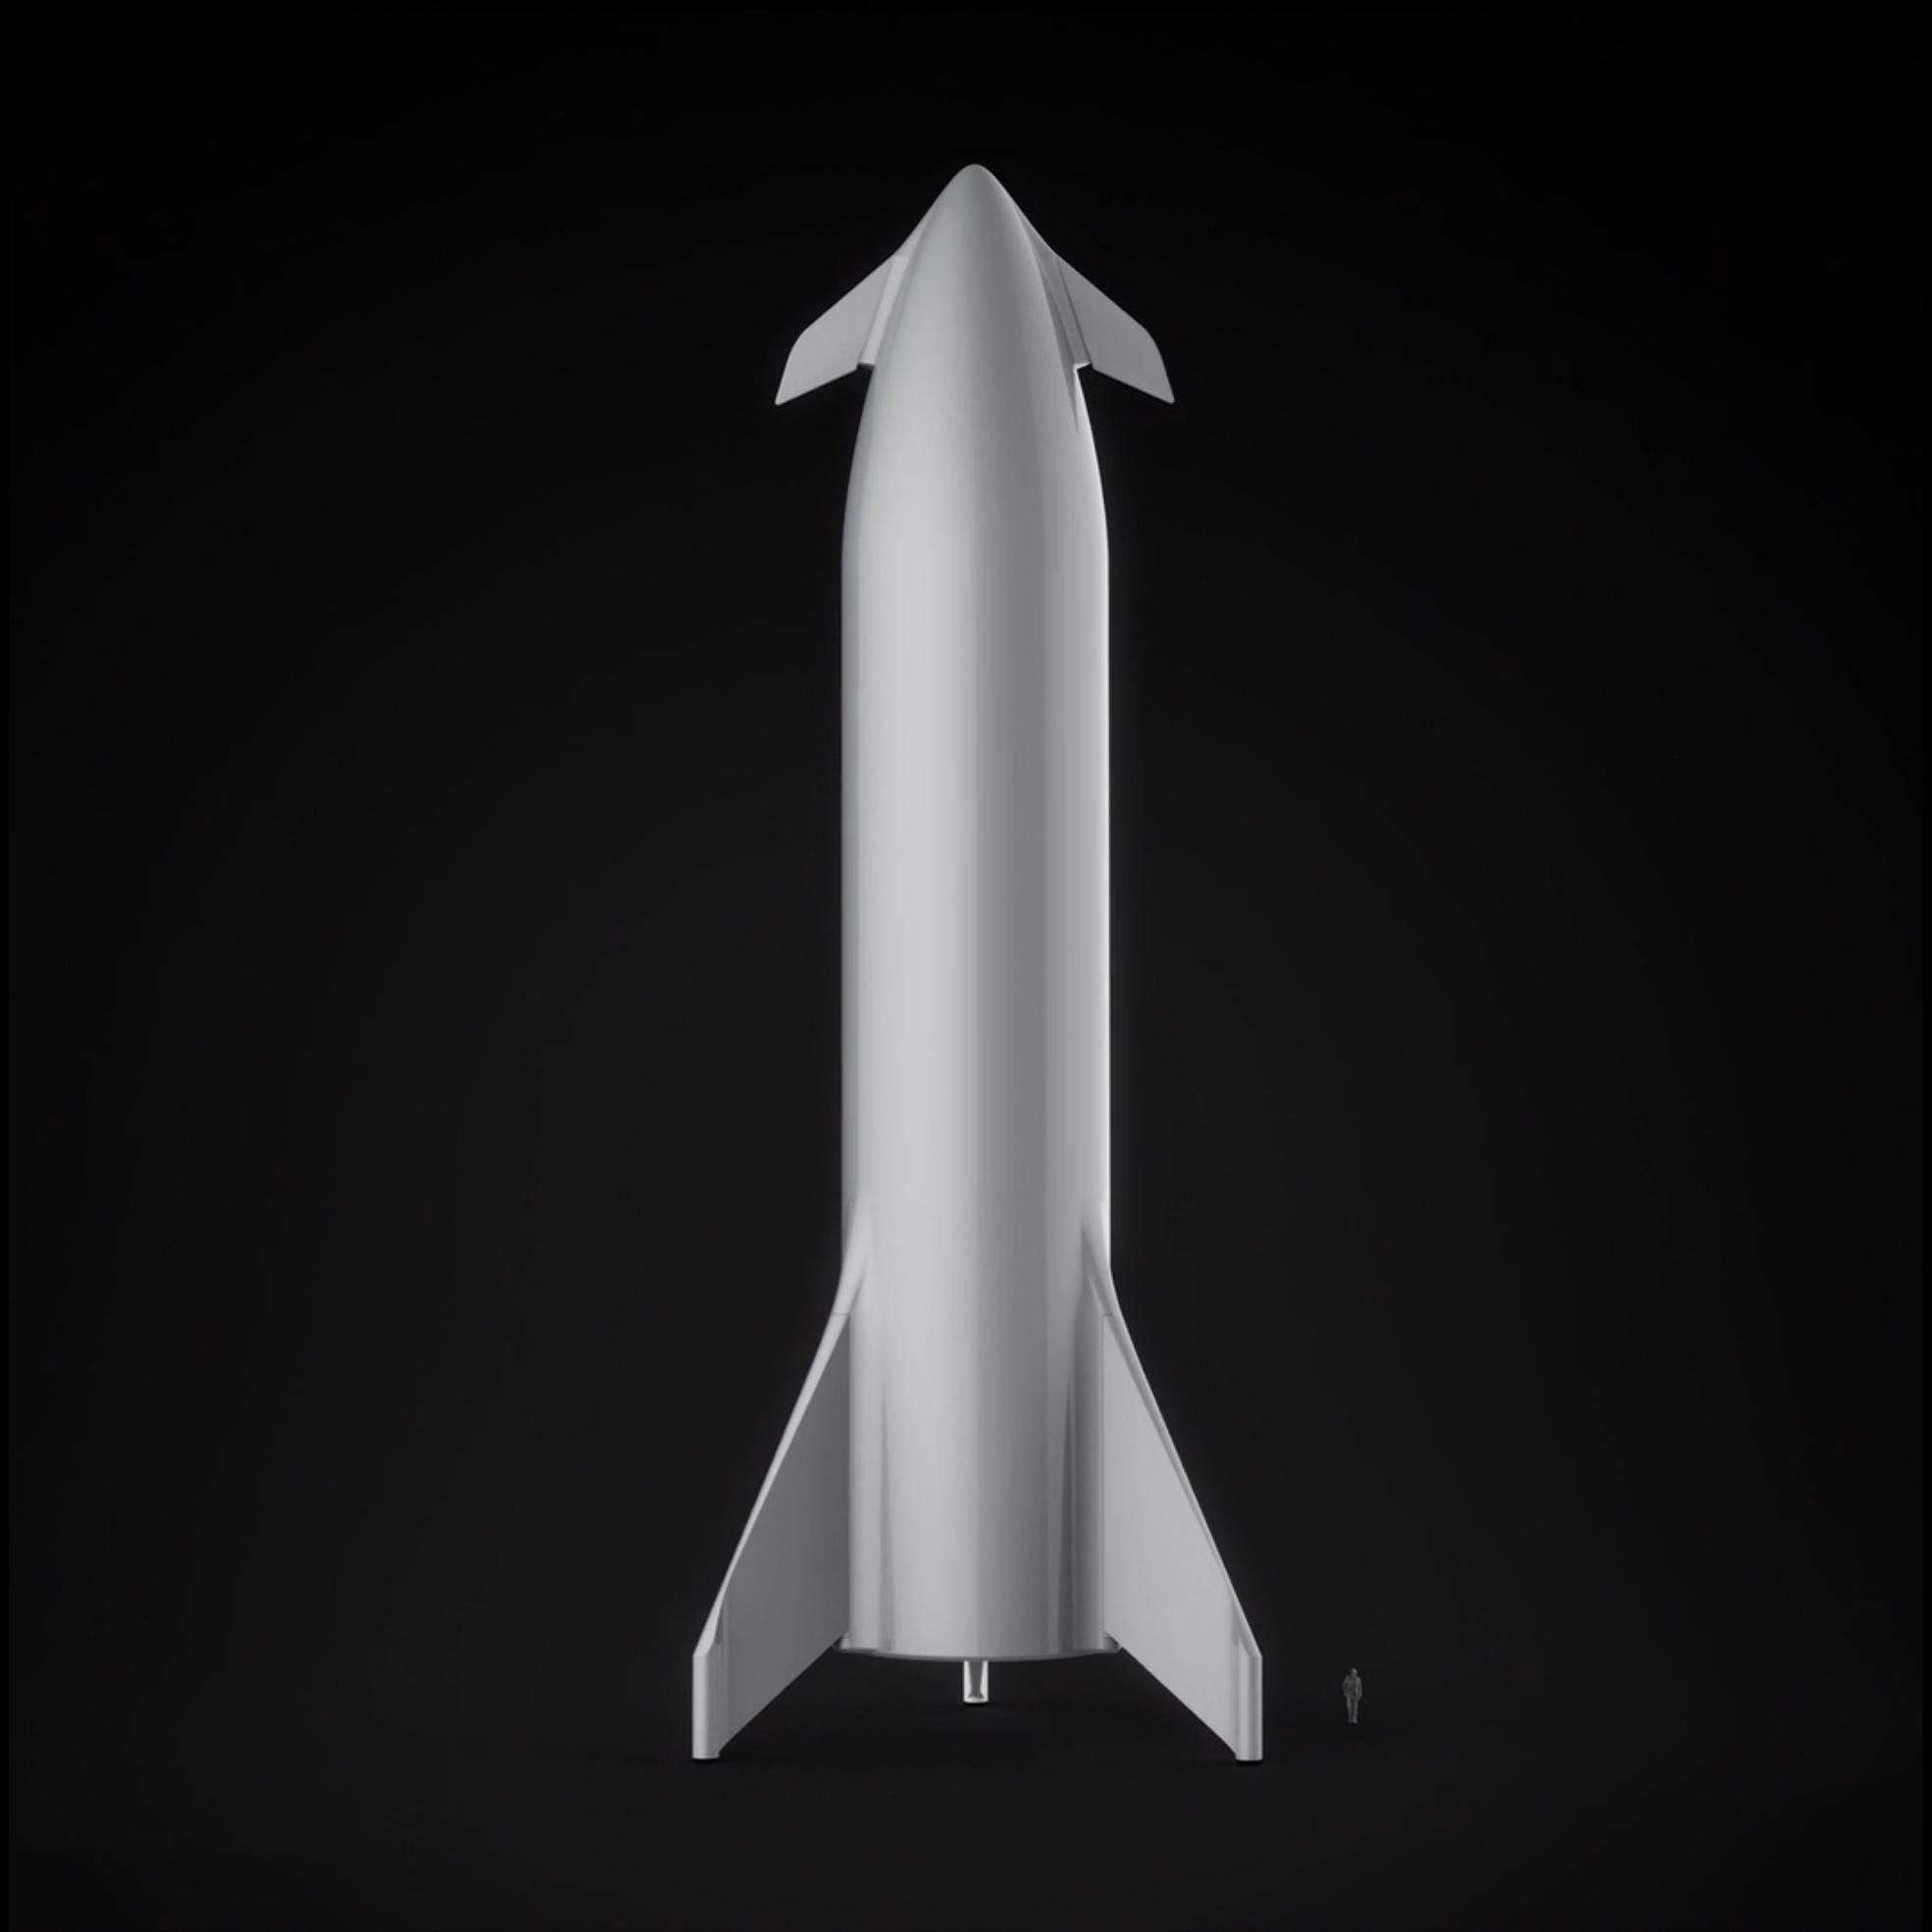 BFS belly 2018 (SpaceX)